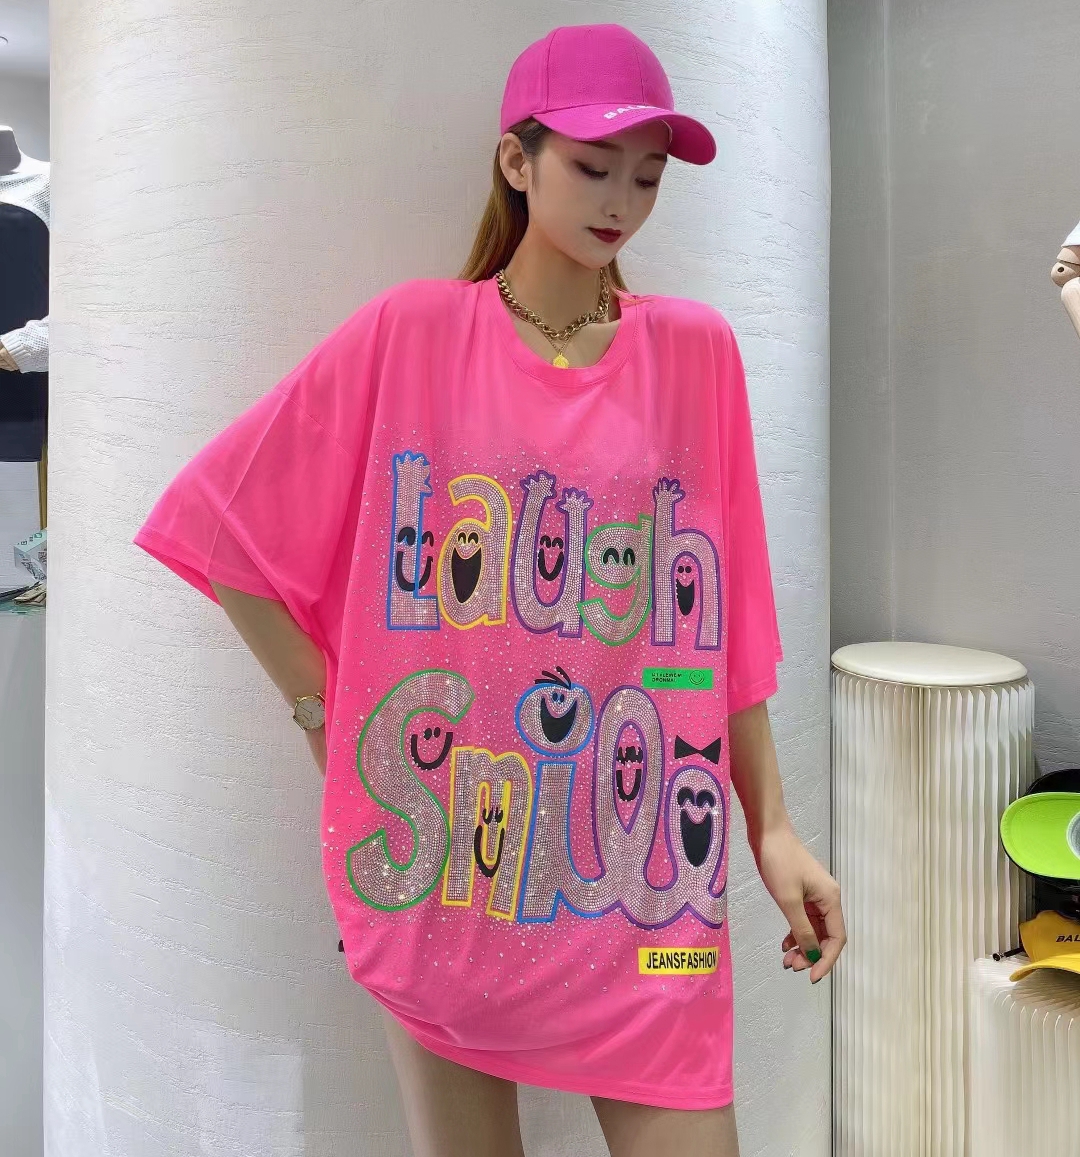 PinkEuropean goods superior quality Genuine ~ ~ Super foreign atmosphere heavy industry ~ ~ thin Ice silk cotton Hot drilling colour easy Short sleeve T-shirt female